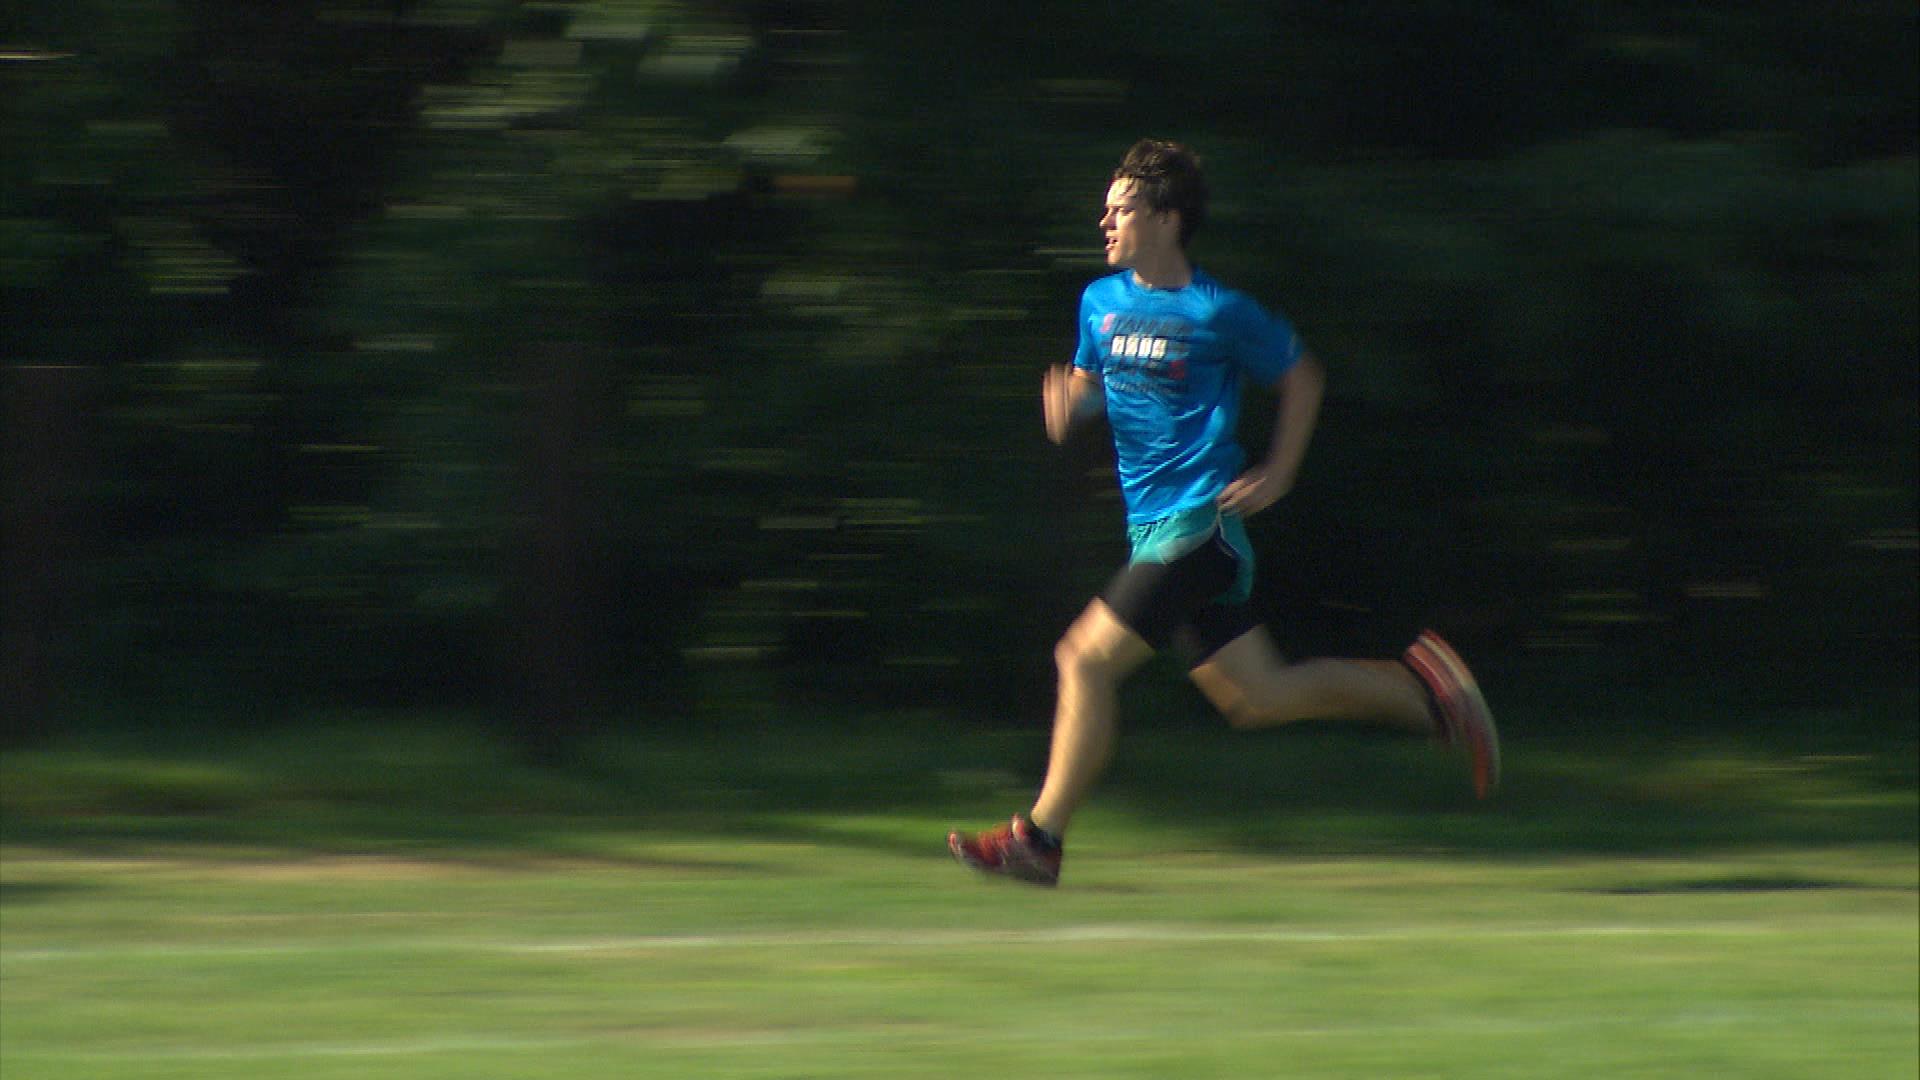 How Running Changed Life for a Boy with Autism